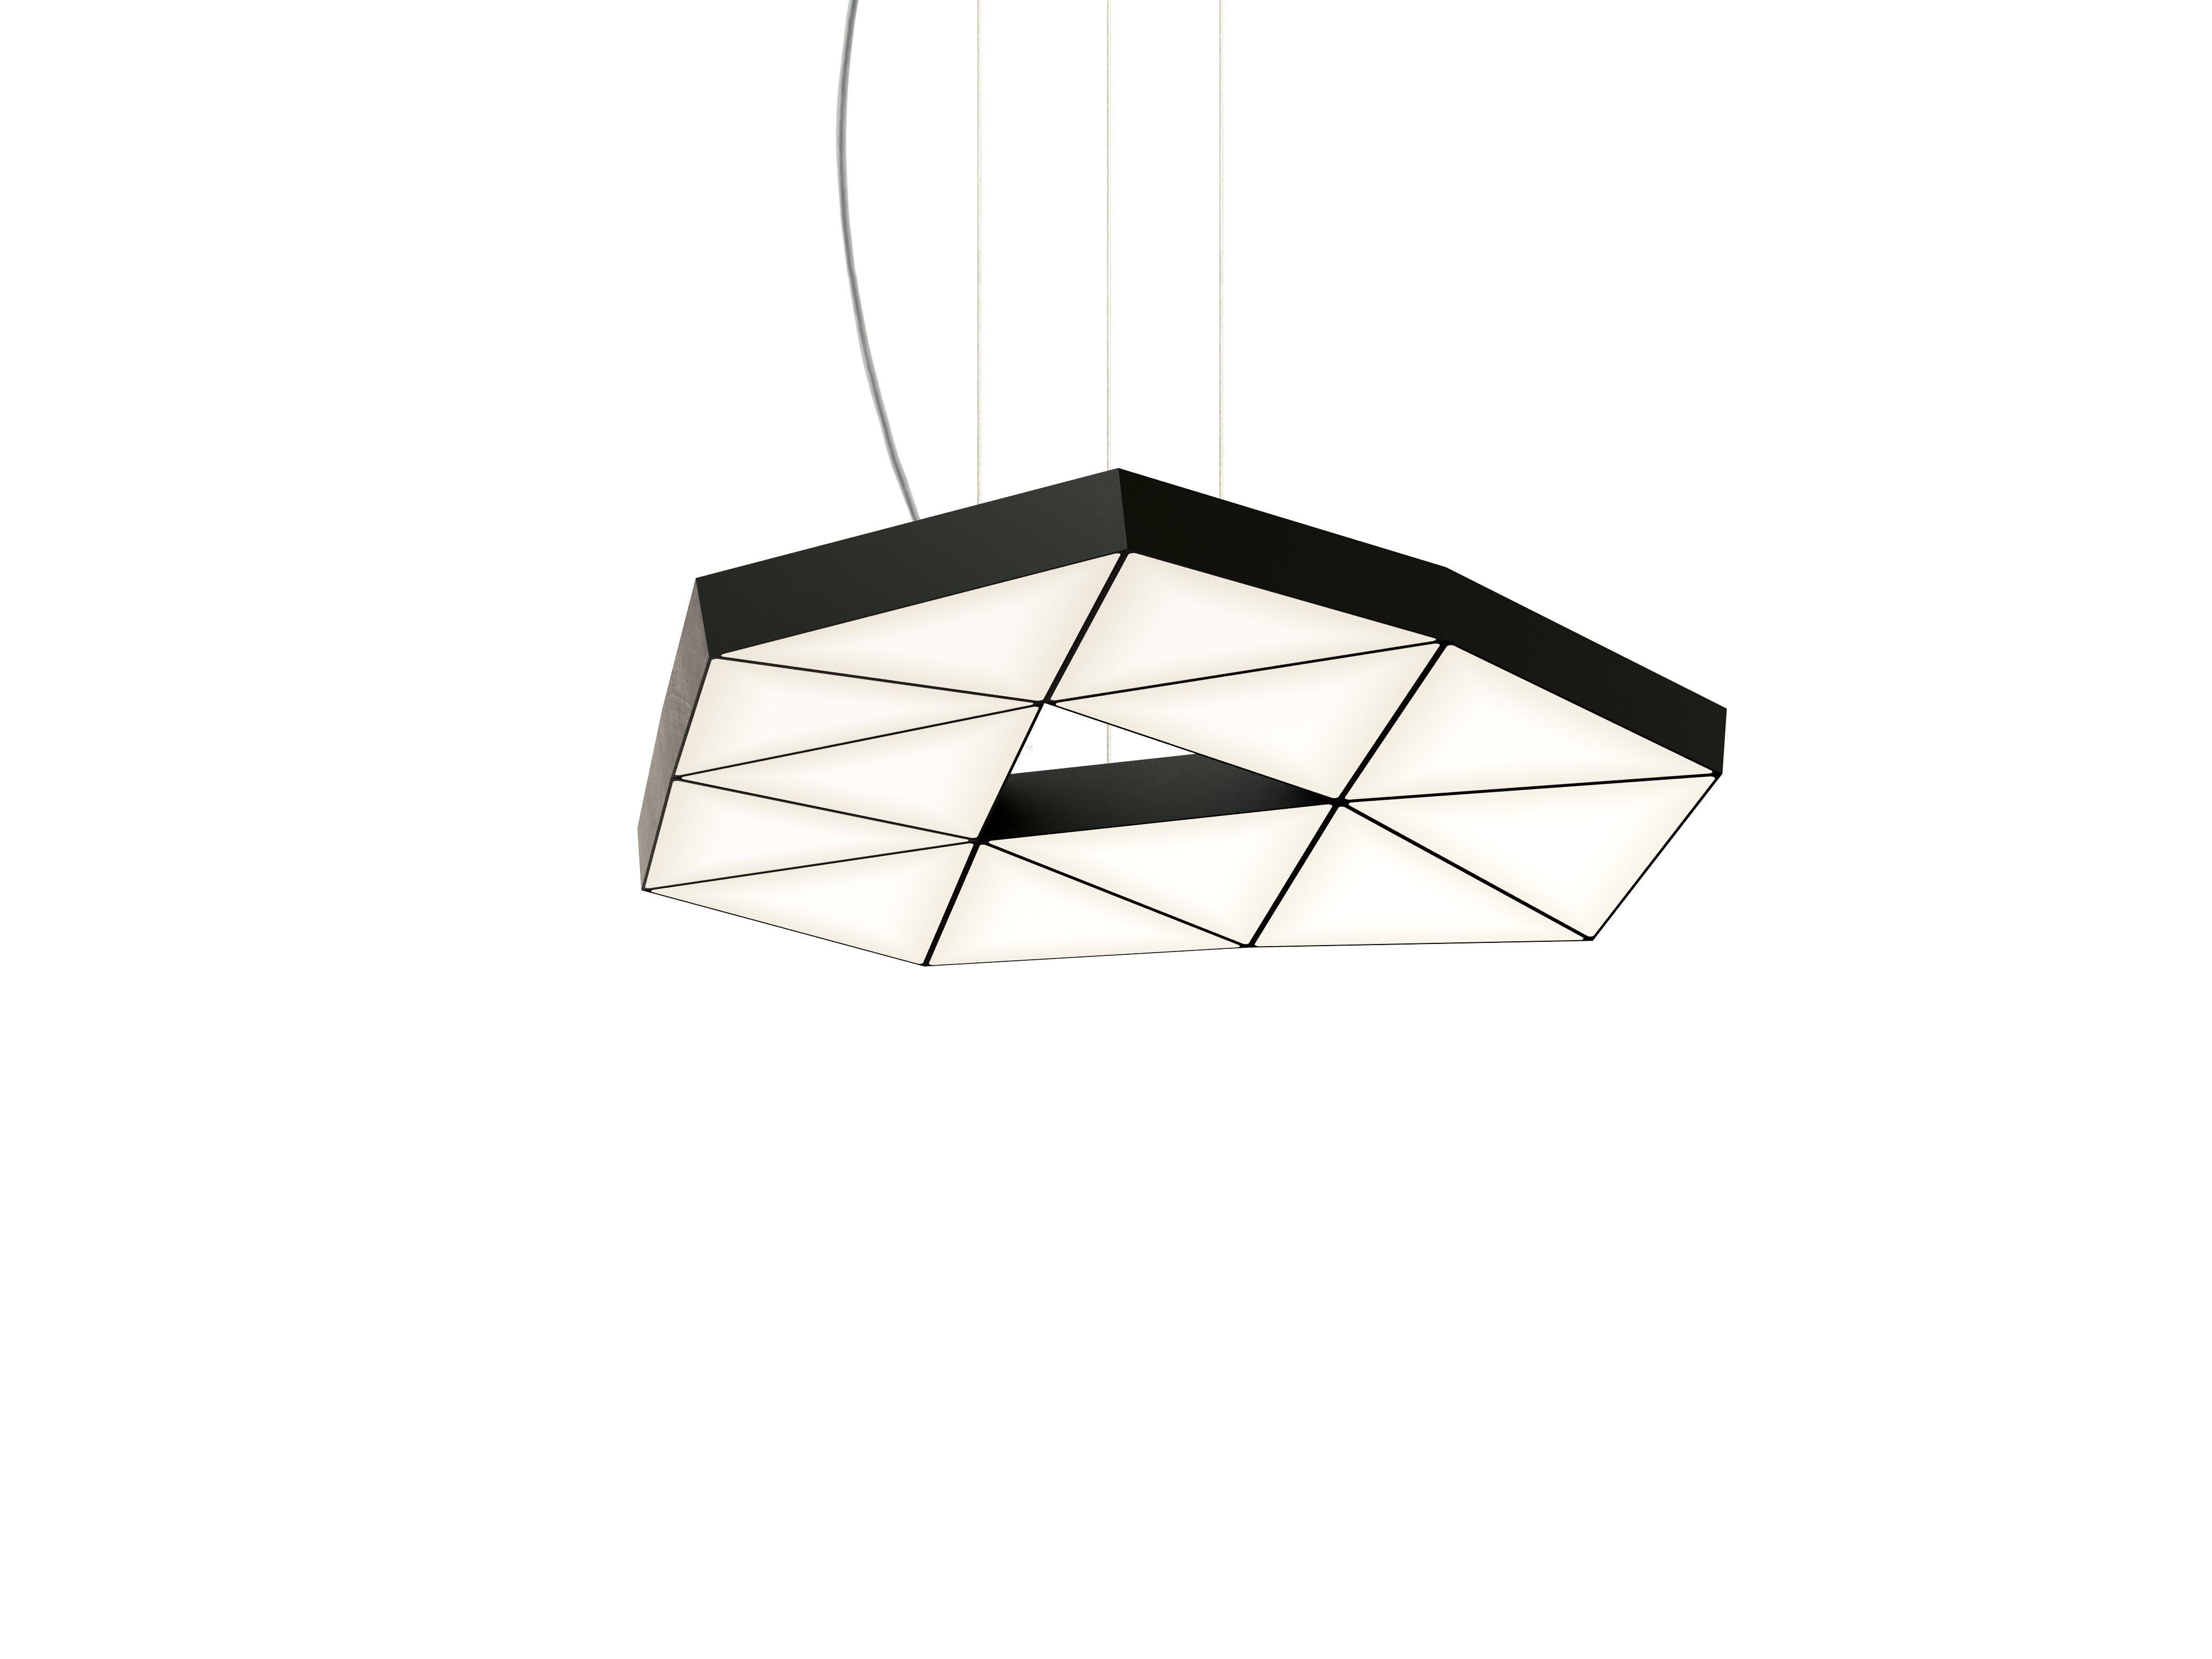 TRI-12.1 TRI ceiling light by Tokio
Dimensions: D 59.9 x W 51.3 x H 20 cm. 
Materials: Modular structure in anodized aluminum. 

Different color finishes. LED, 2.3W per module. 2700K-4000K adjustable. CRI90.
Dimmable. Programmable. 12, 18, 26,